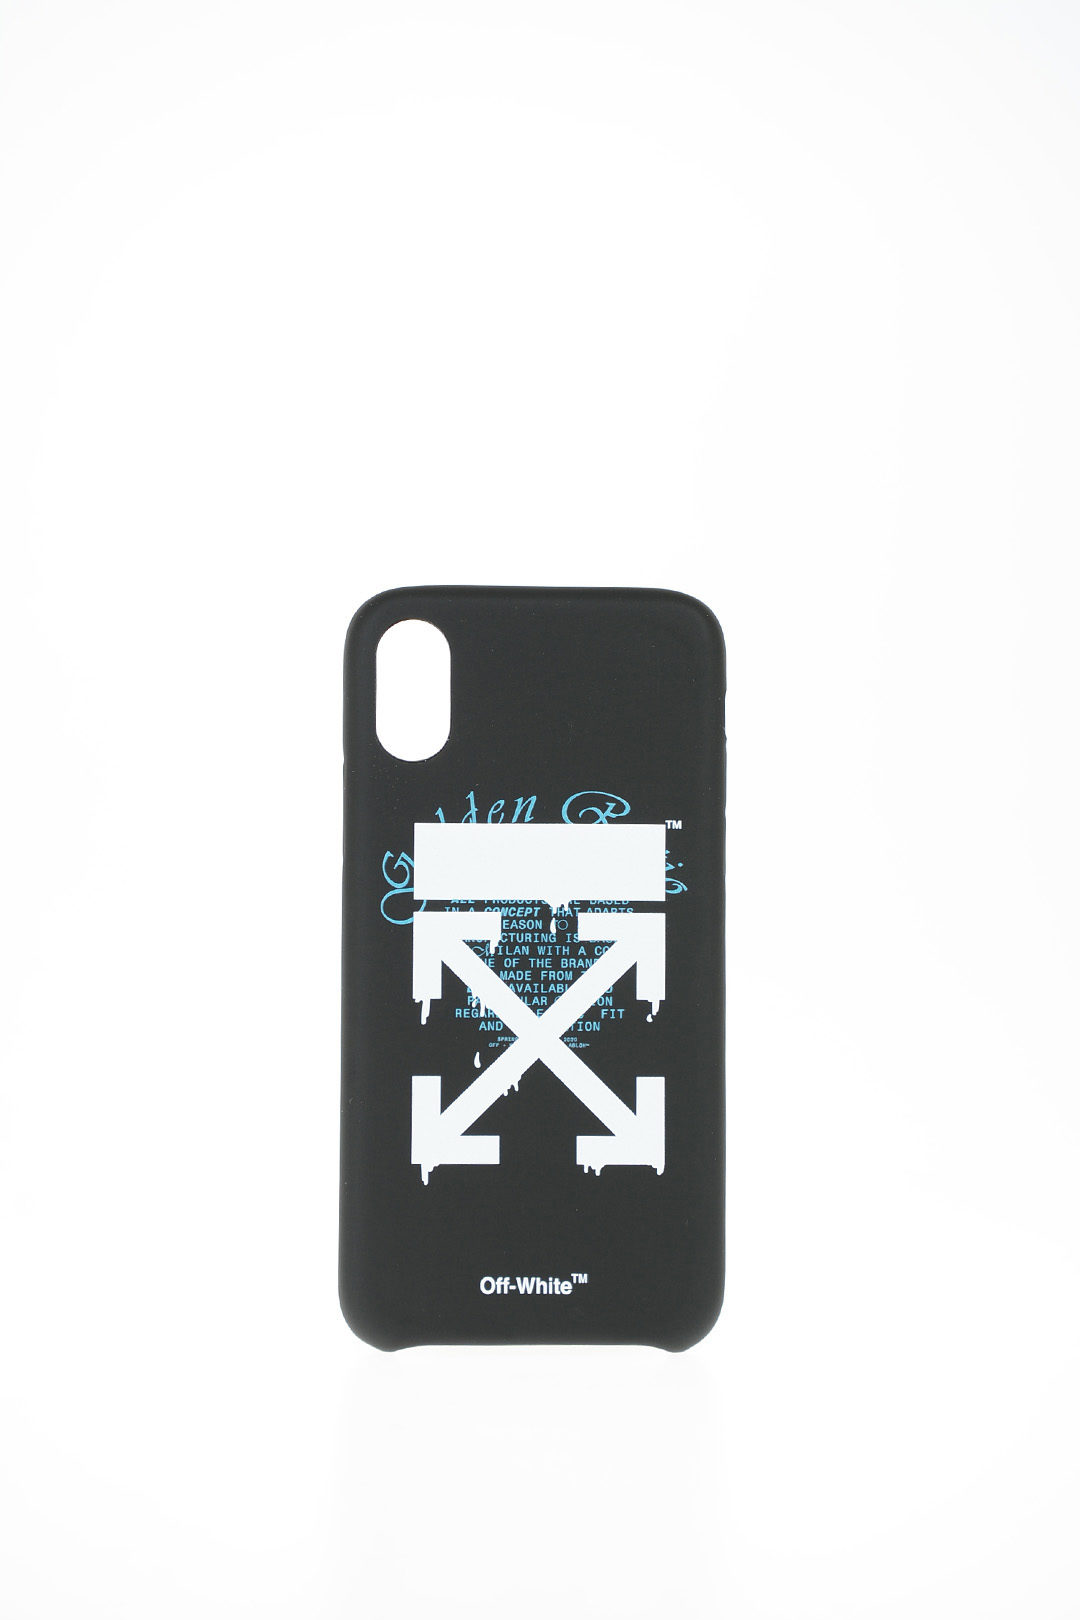 Off-White Iphone Dripping Arrows Cover Case with Logo unisex men women - Glamood Outlet